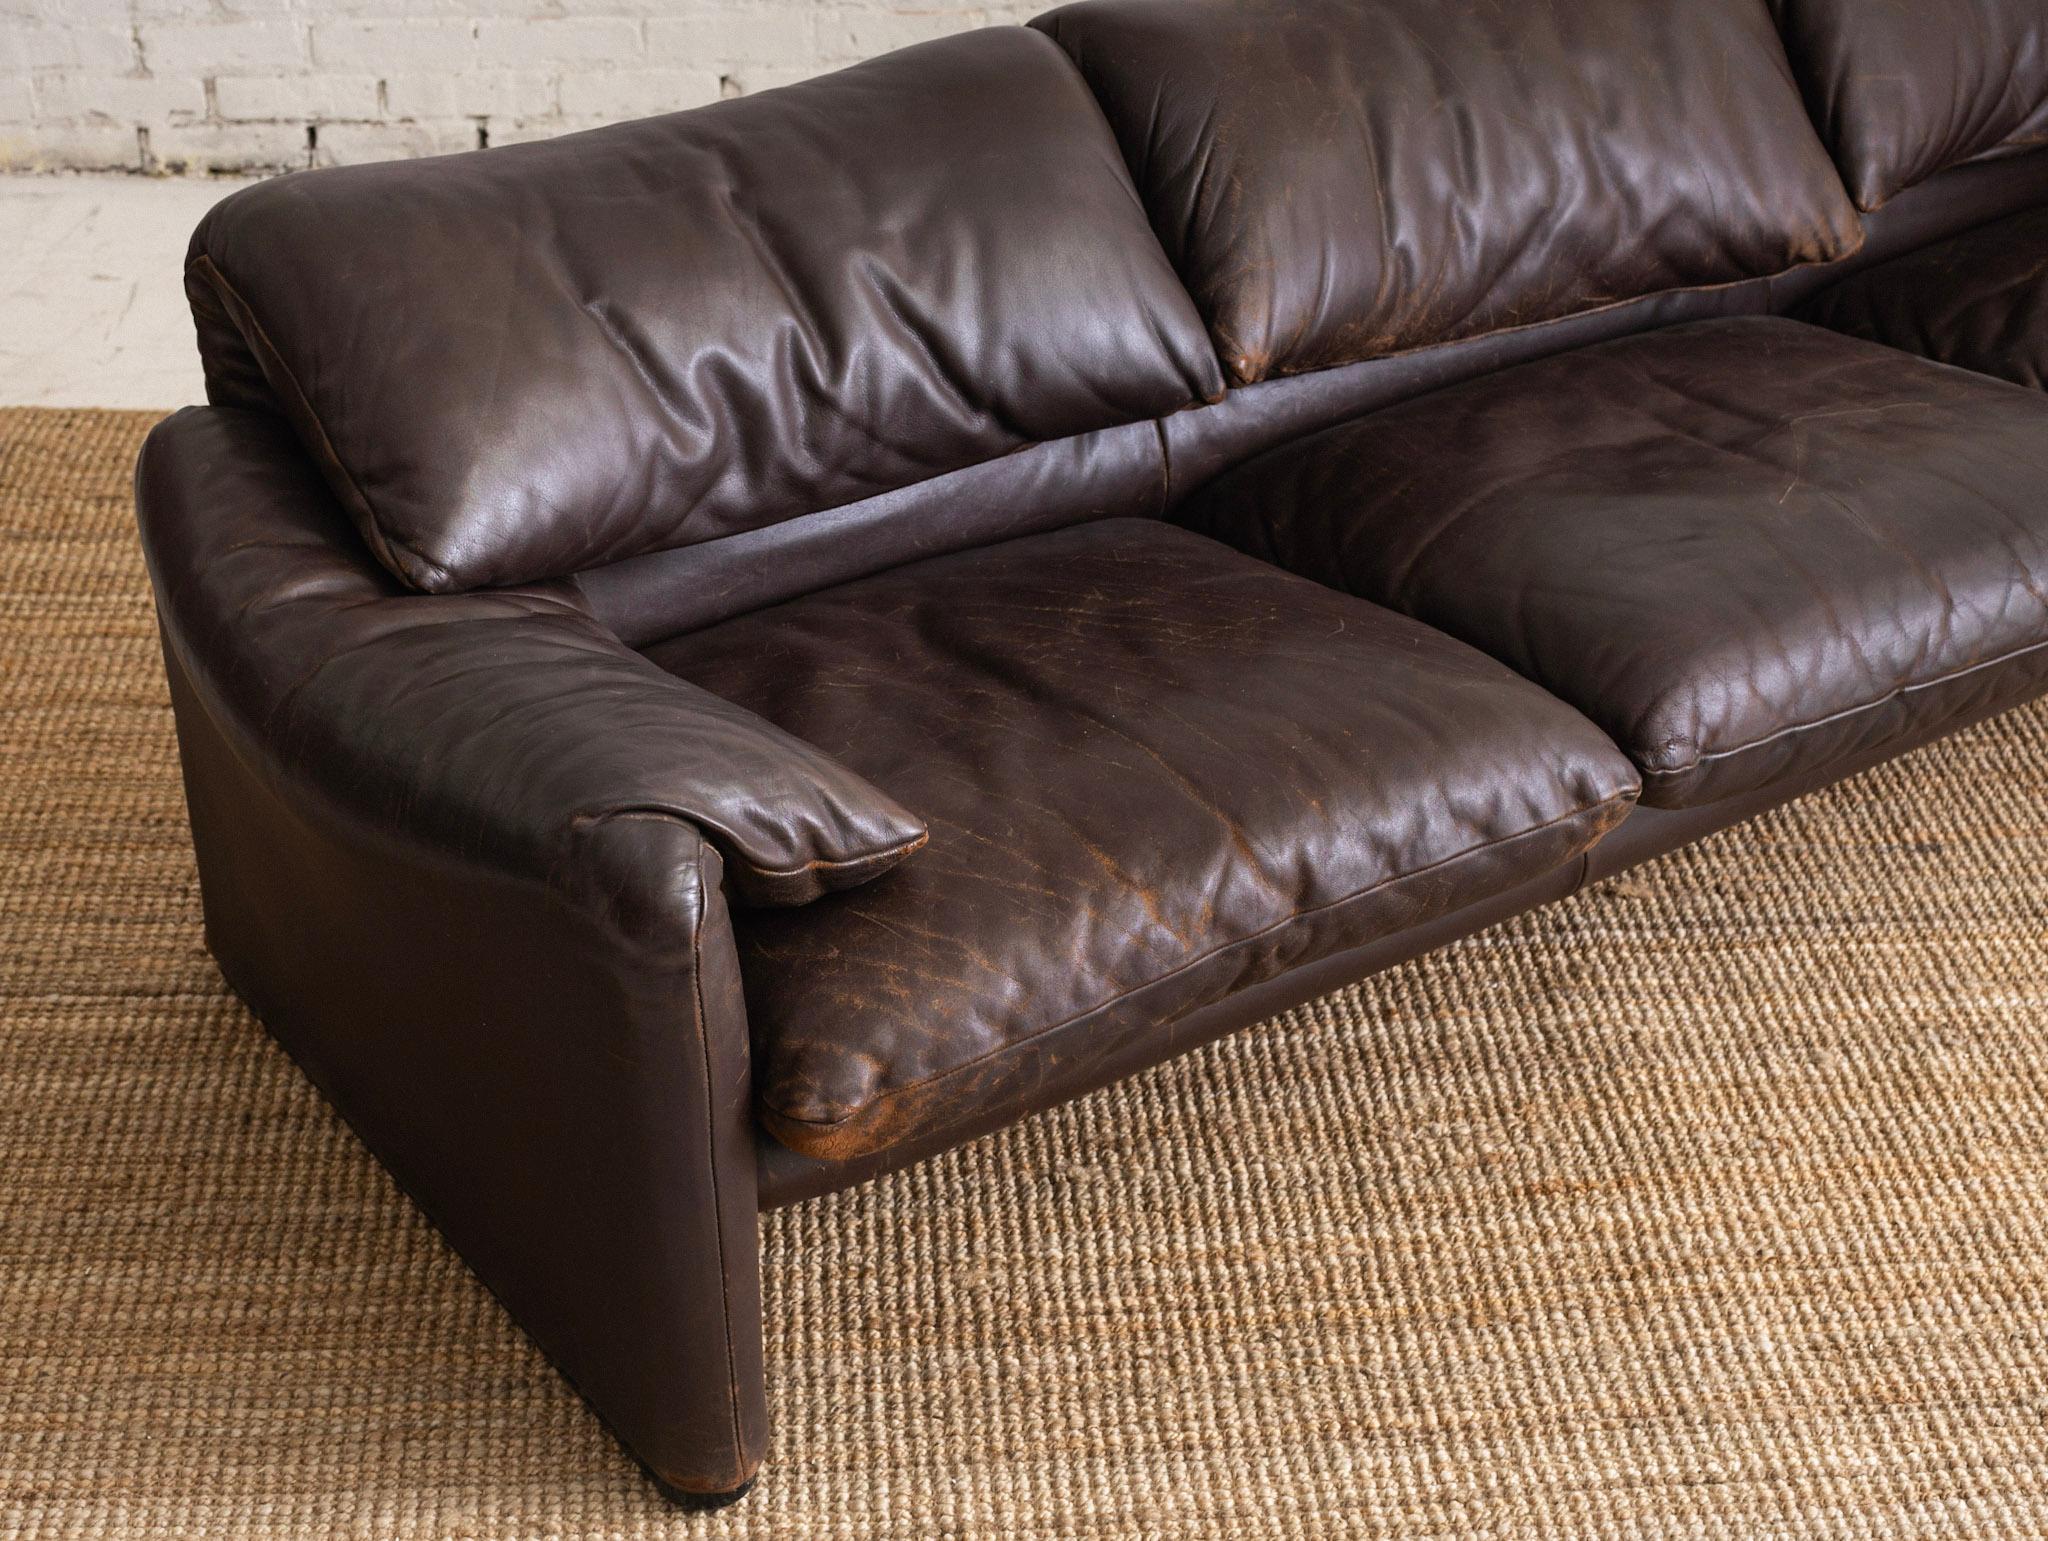 Maralunga 3 Seat Sofa by Vico Magistretti for Cassina in Chocolate Brown Leather 1